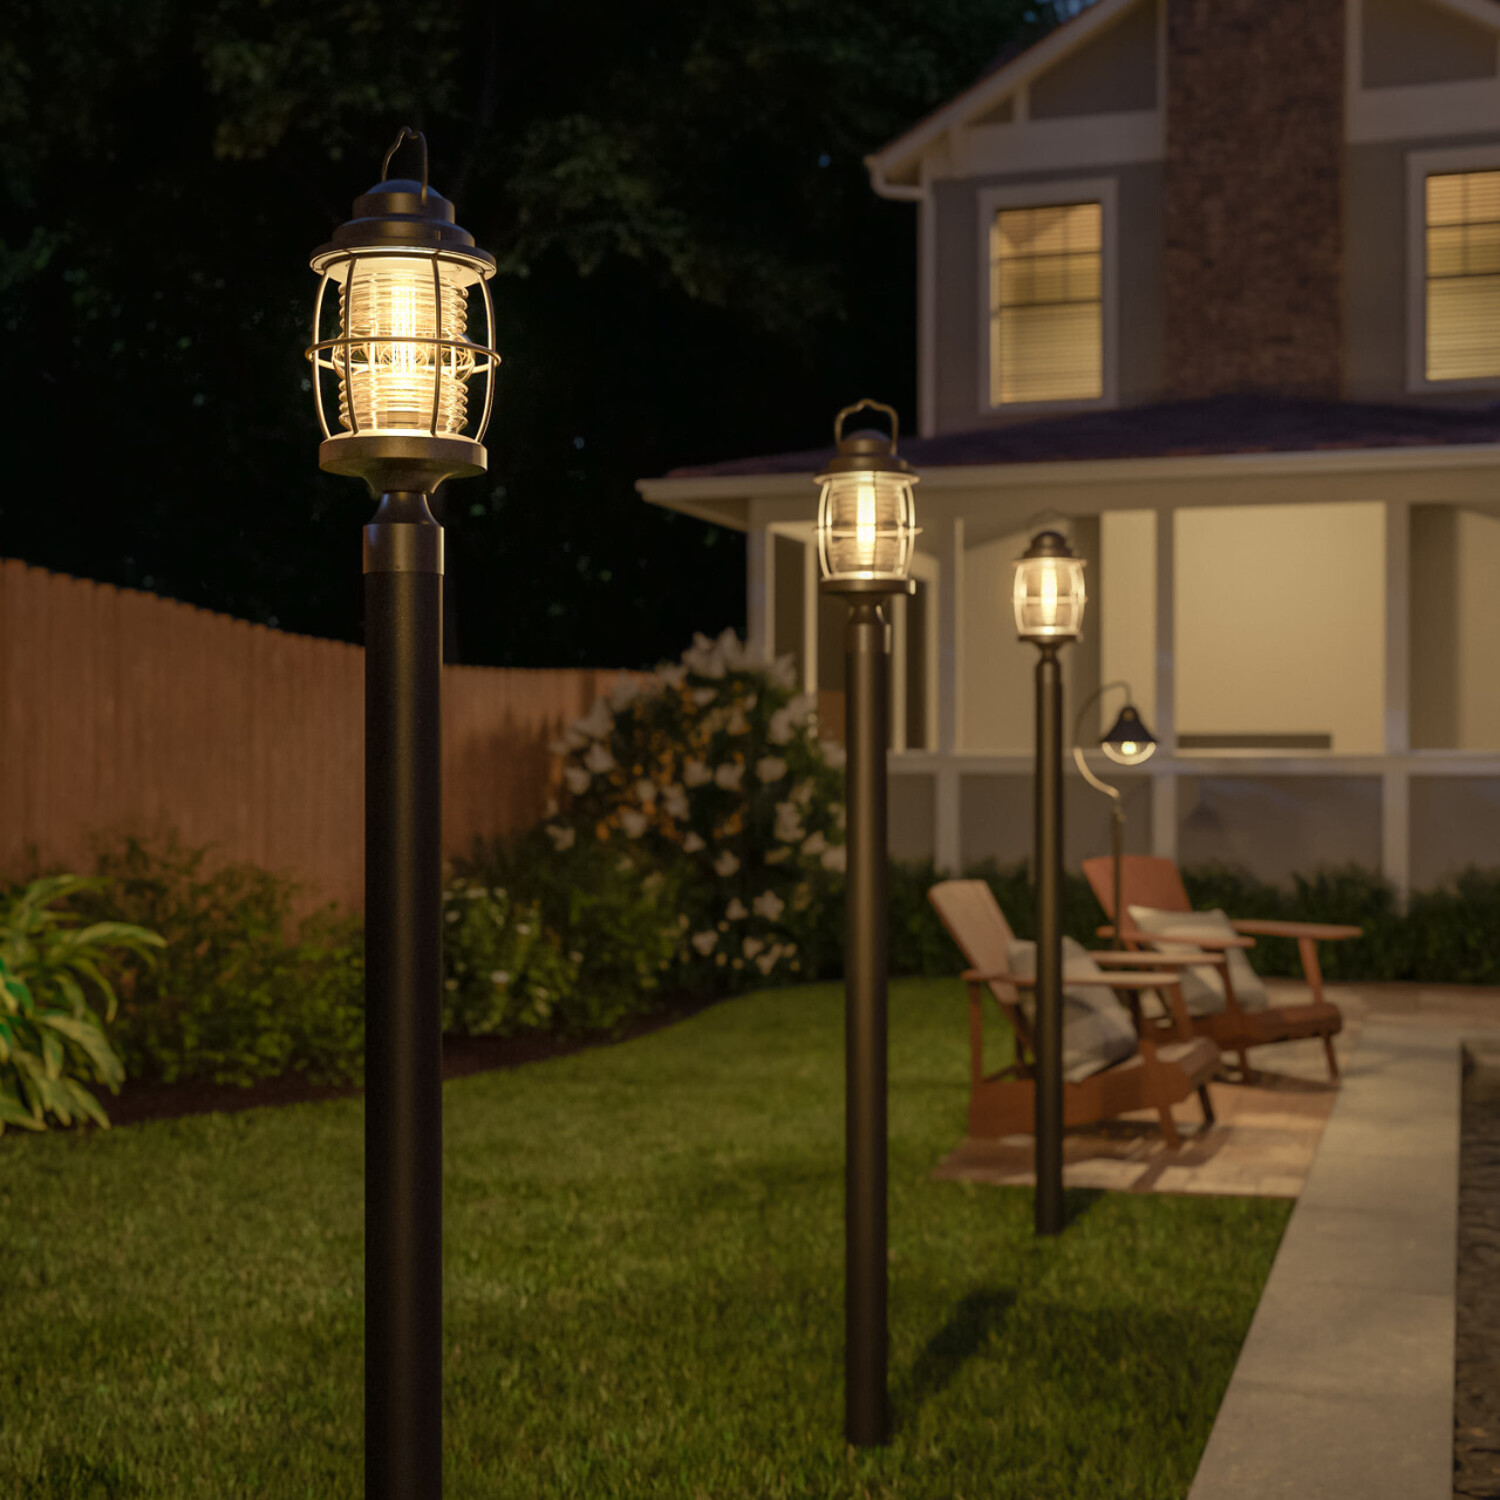 Beacon 1 Light Post Lantern with Copper Finish - image 5 of 8